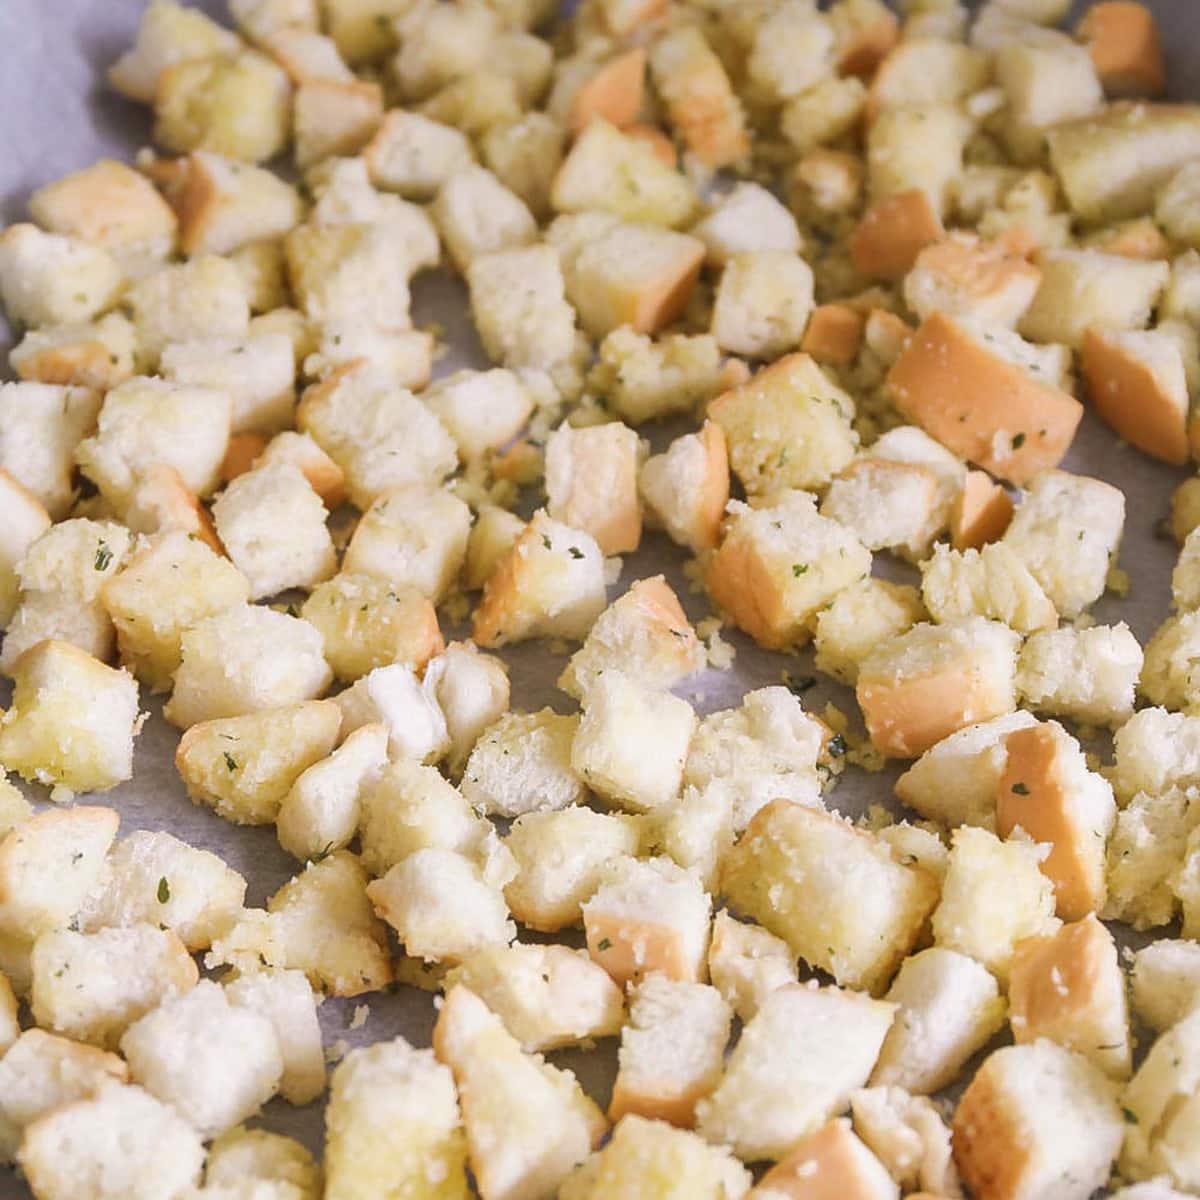 Bread cubes covered with oil and seasonings to make homemade  croutons.